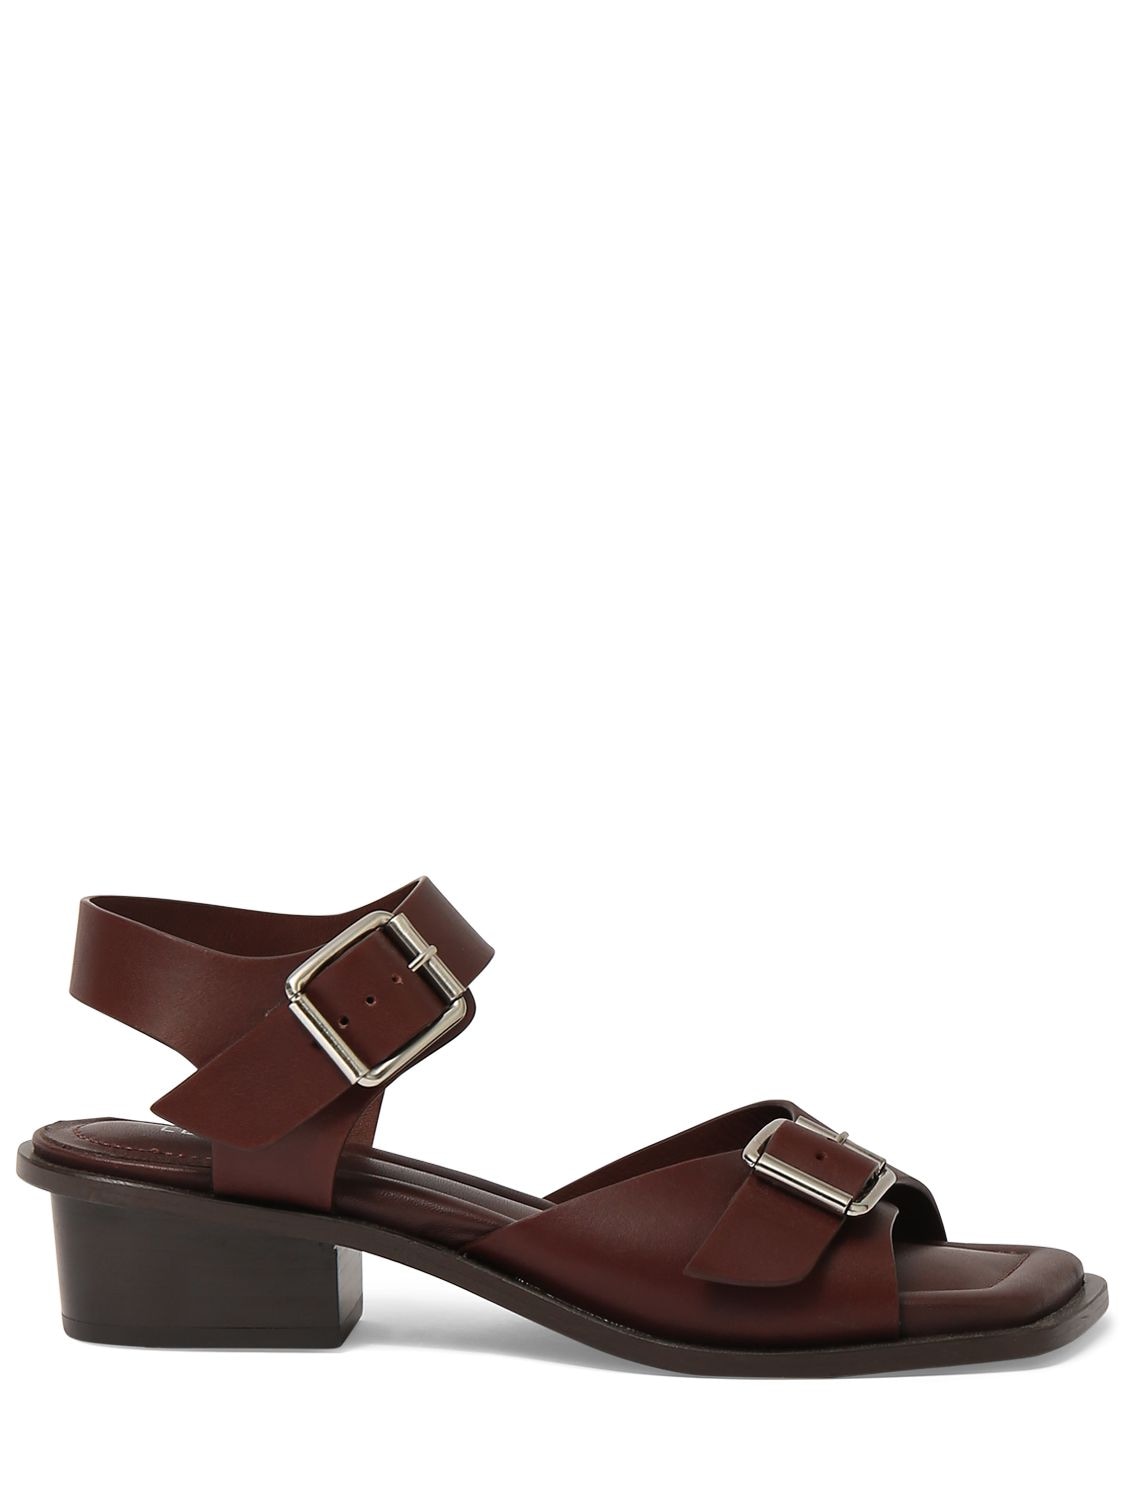 Lemaire 35mm Square Heeled Sandals W/ Straps In Dark Brown